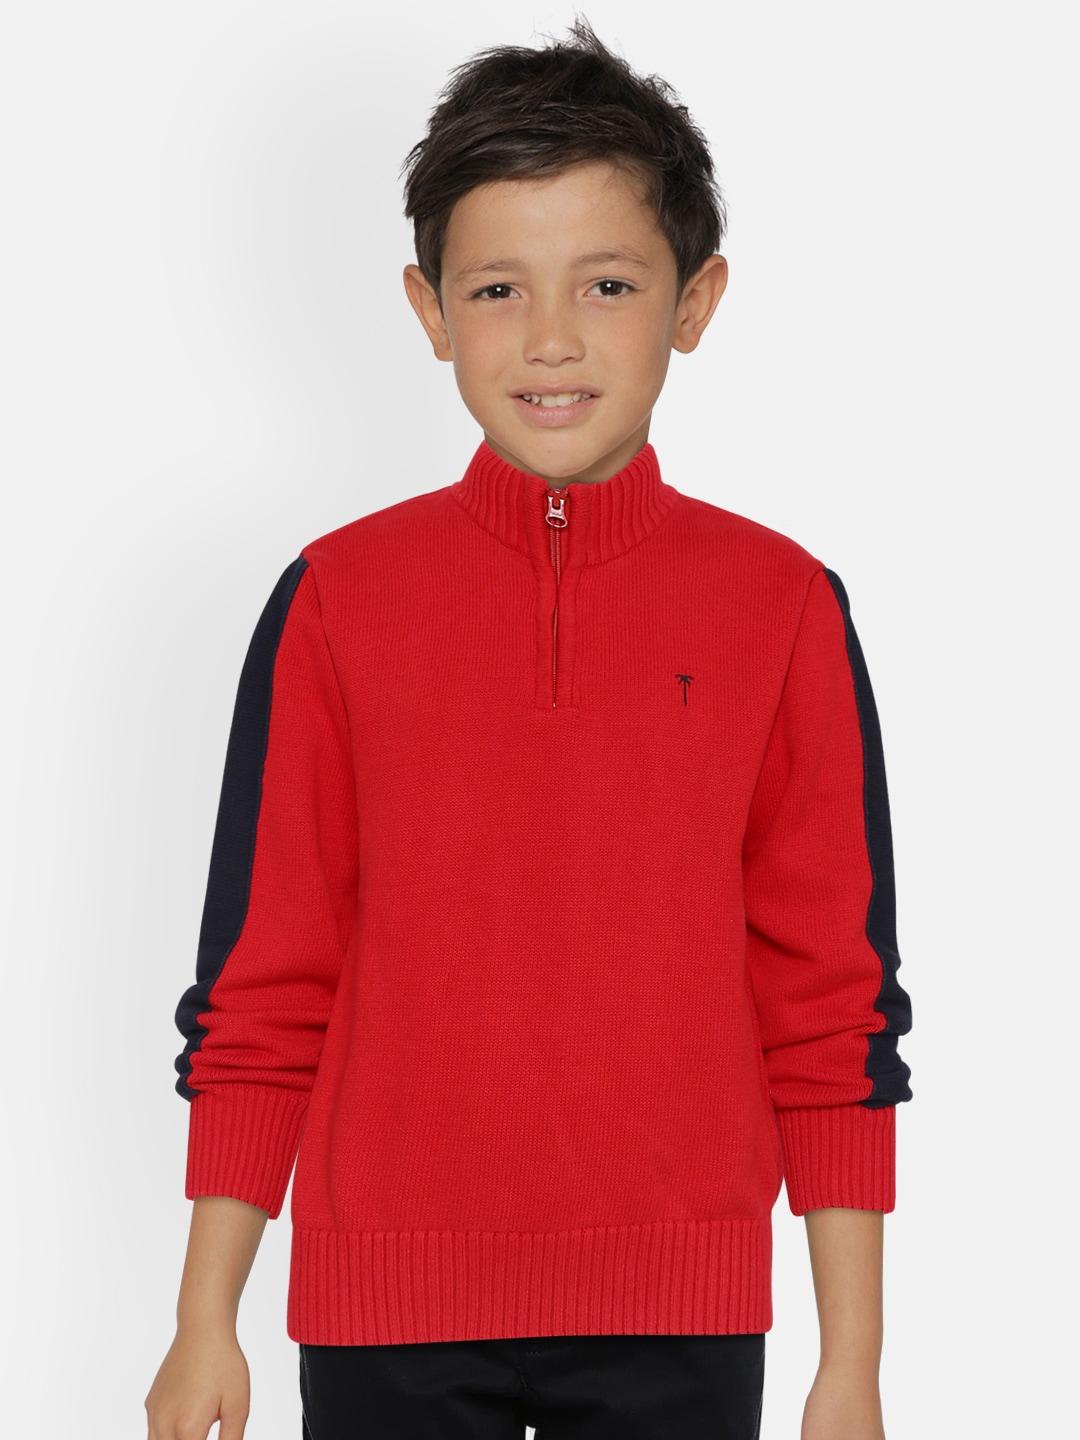 palm-tree-boys-red-solid-sweater